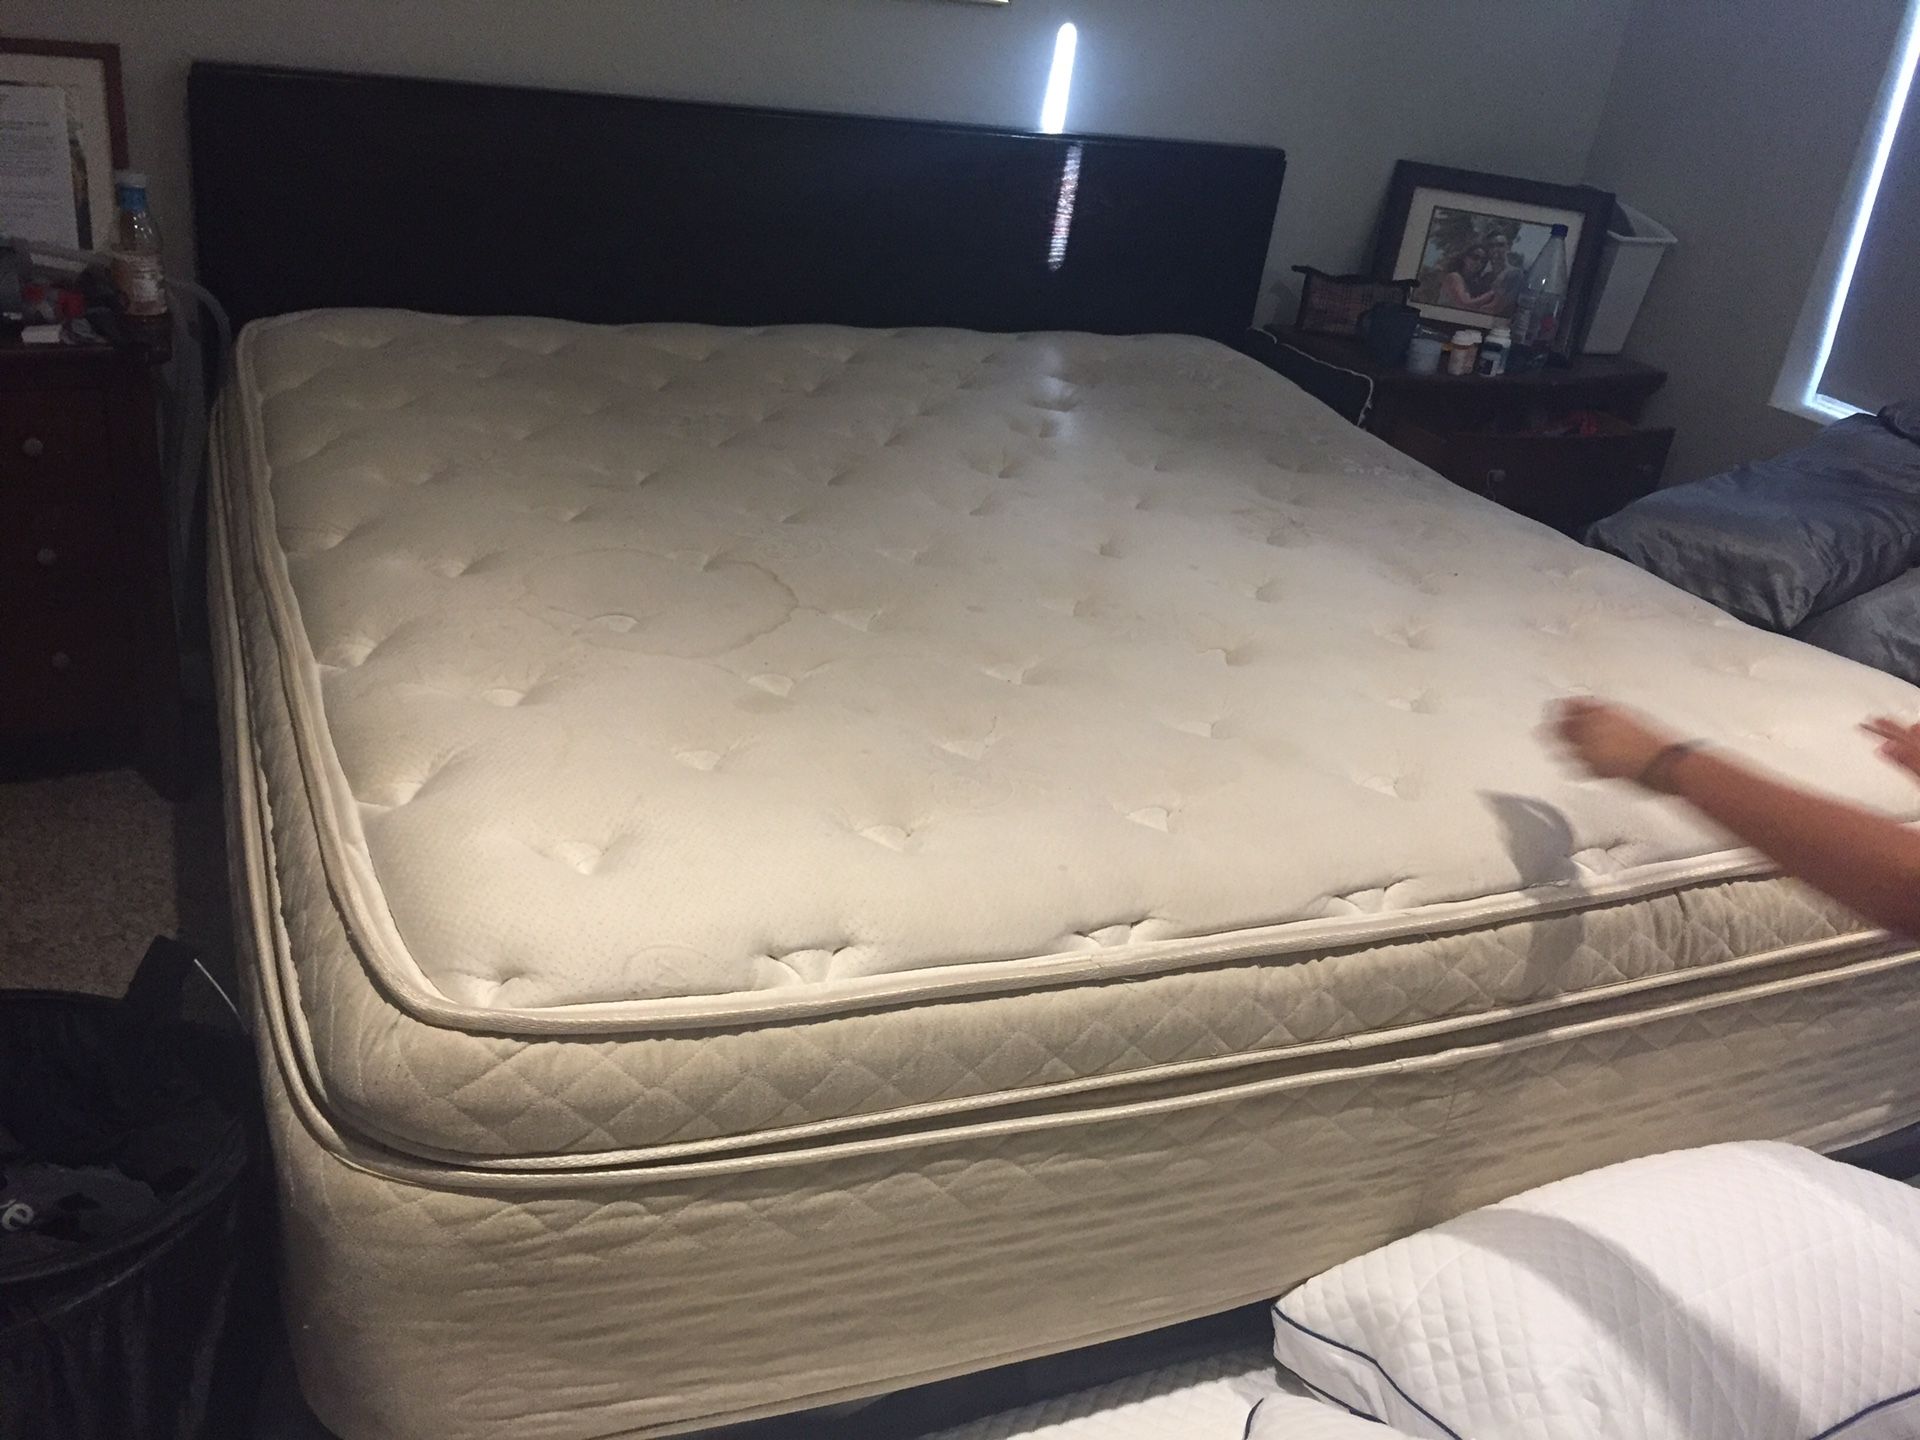 Free dress Pillow Top California King mattress. Has some coffee and juice stains.